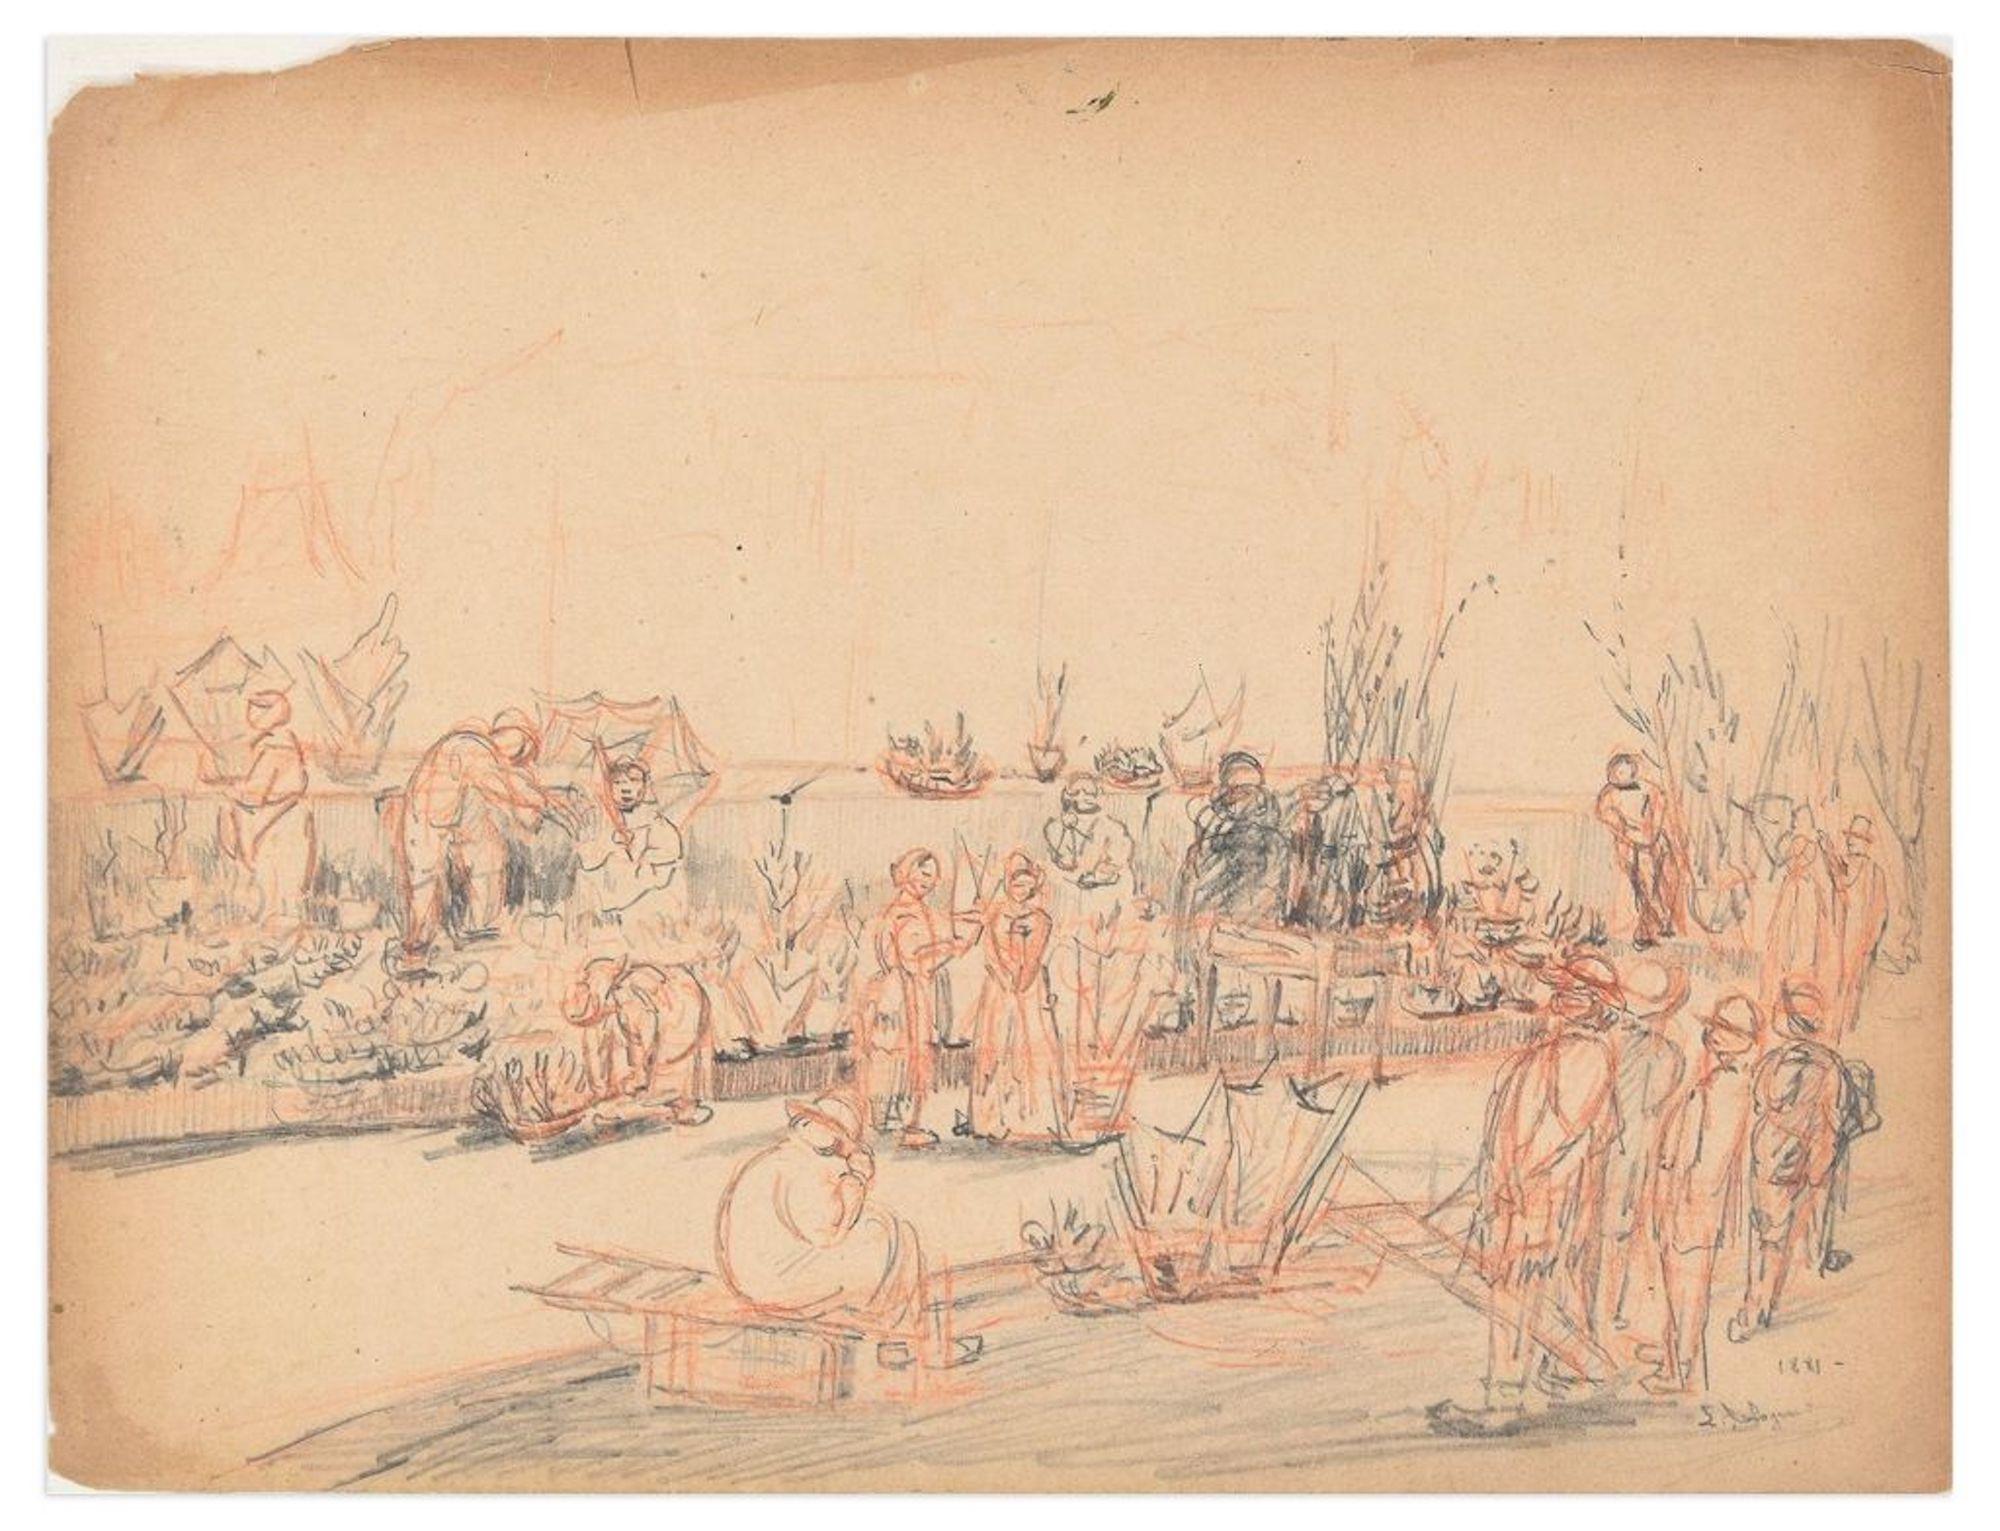 People in the Village is an original artwork realized in 1881. 

Original pencil and colored pencil on paper. Dated and hand-signed on the lower right corner. 

Quite good conditions. Damages on the upper left corner. 

Fresh sketch representing